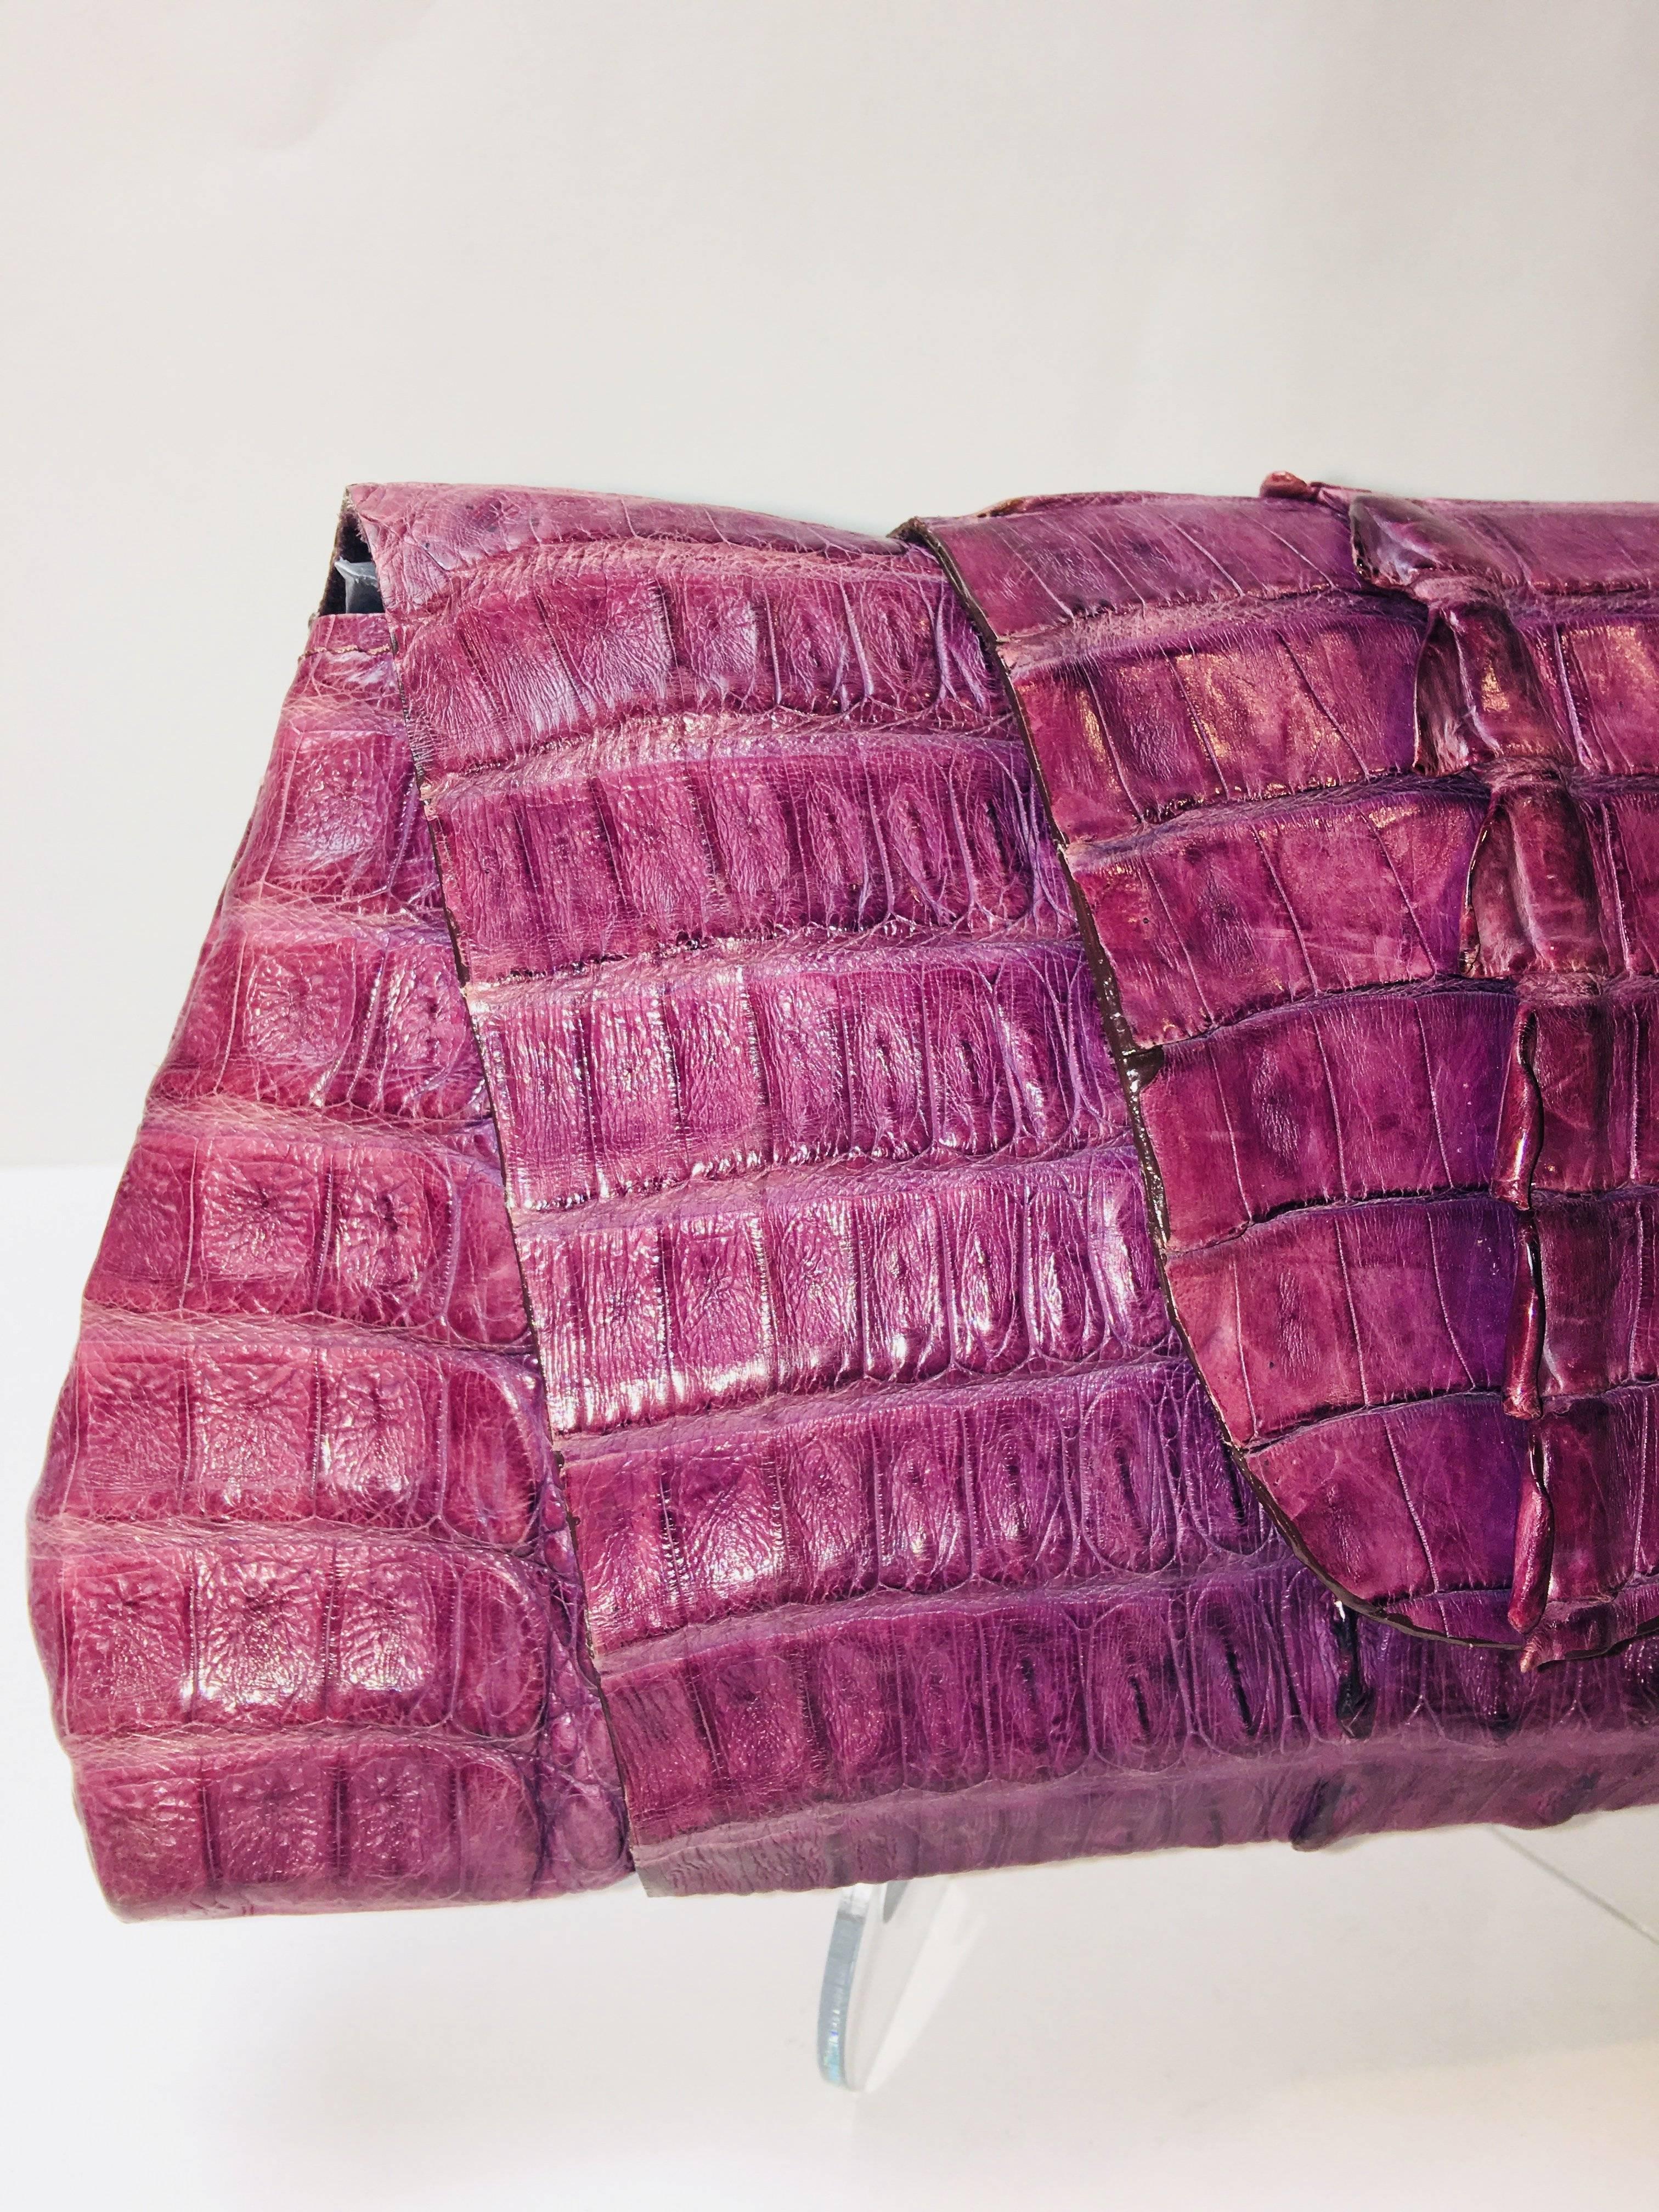 Charlie Choo Purple Alligator Tail Wrap Clutch with Suede Inside. 